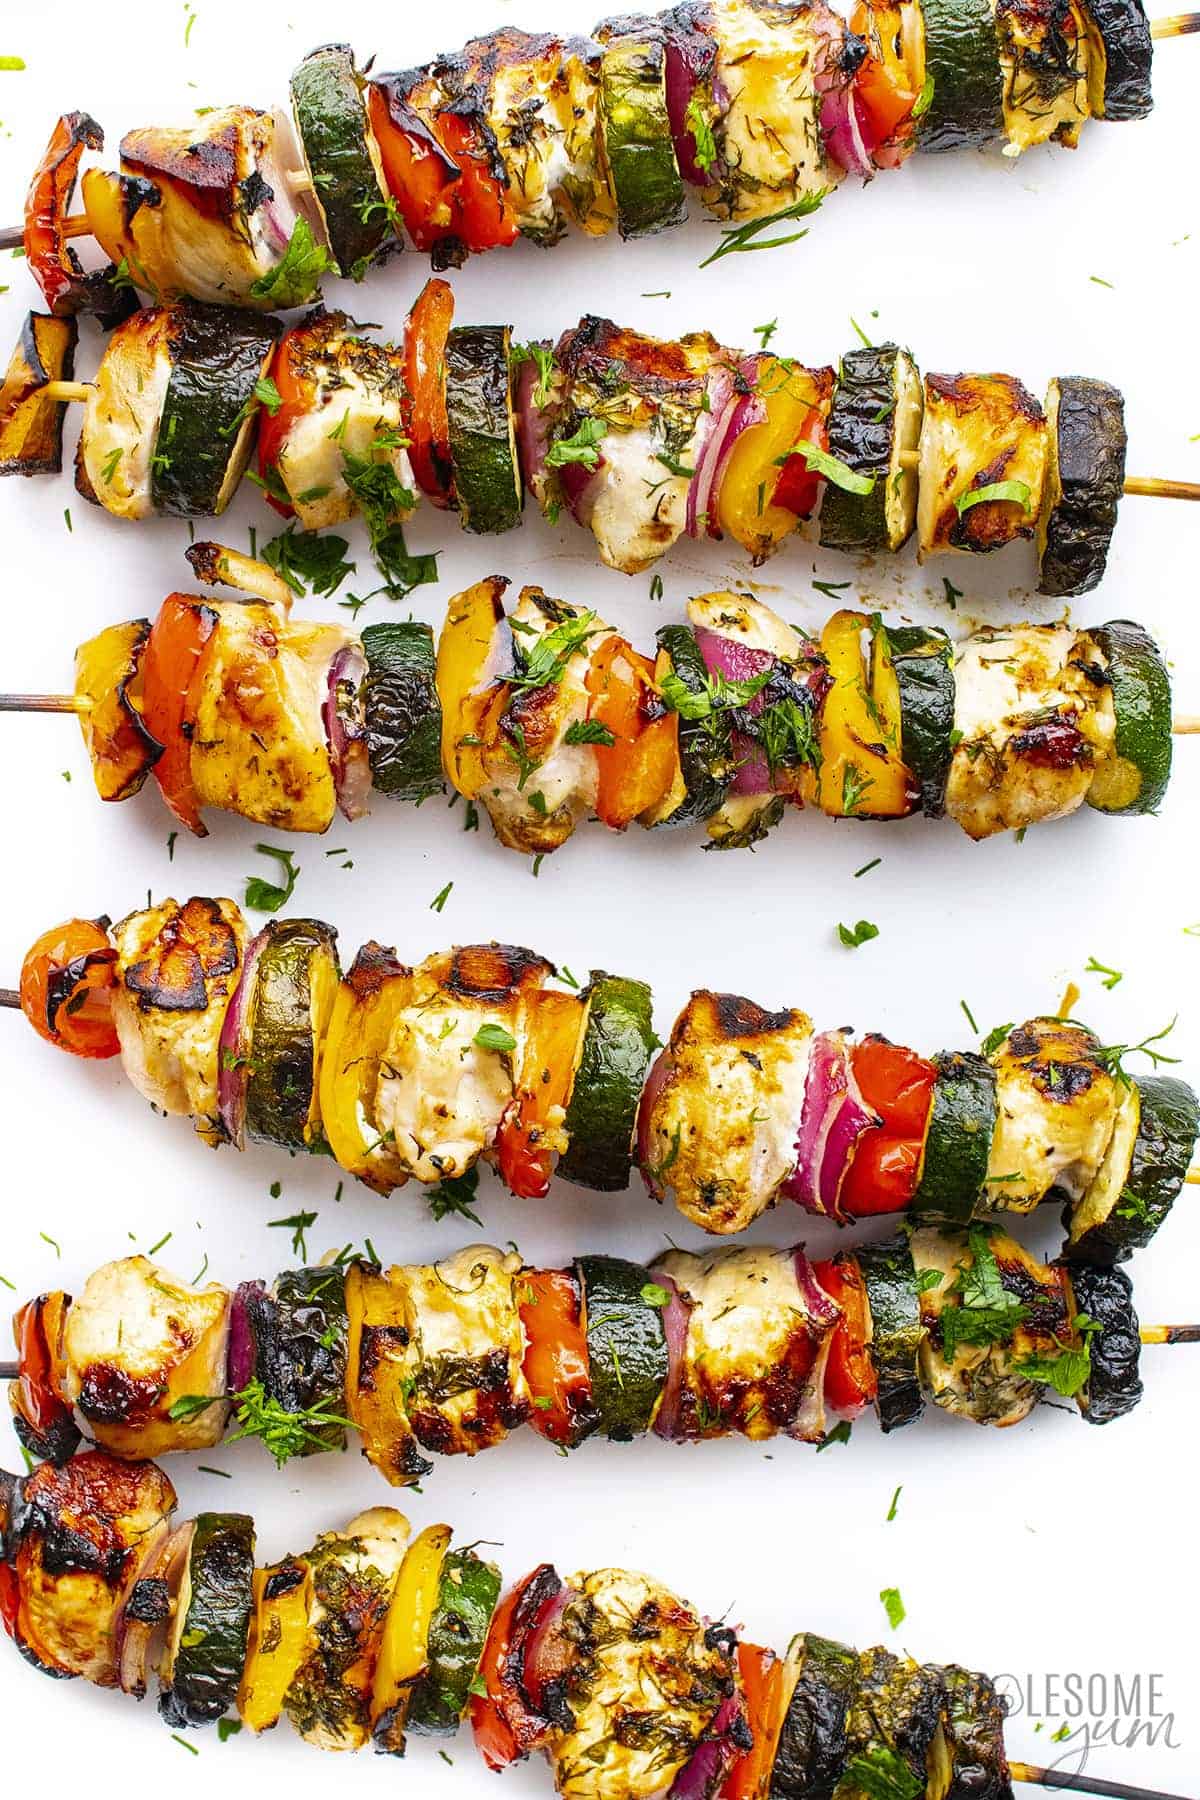 Chicken and vegetable  on skewers.